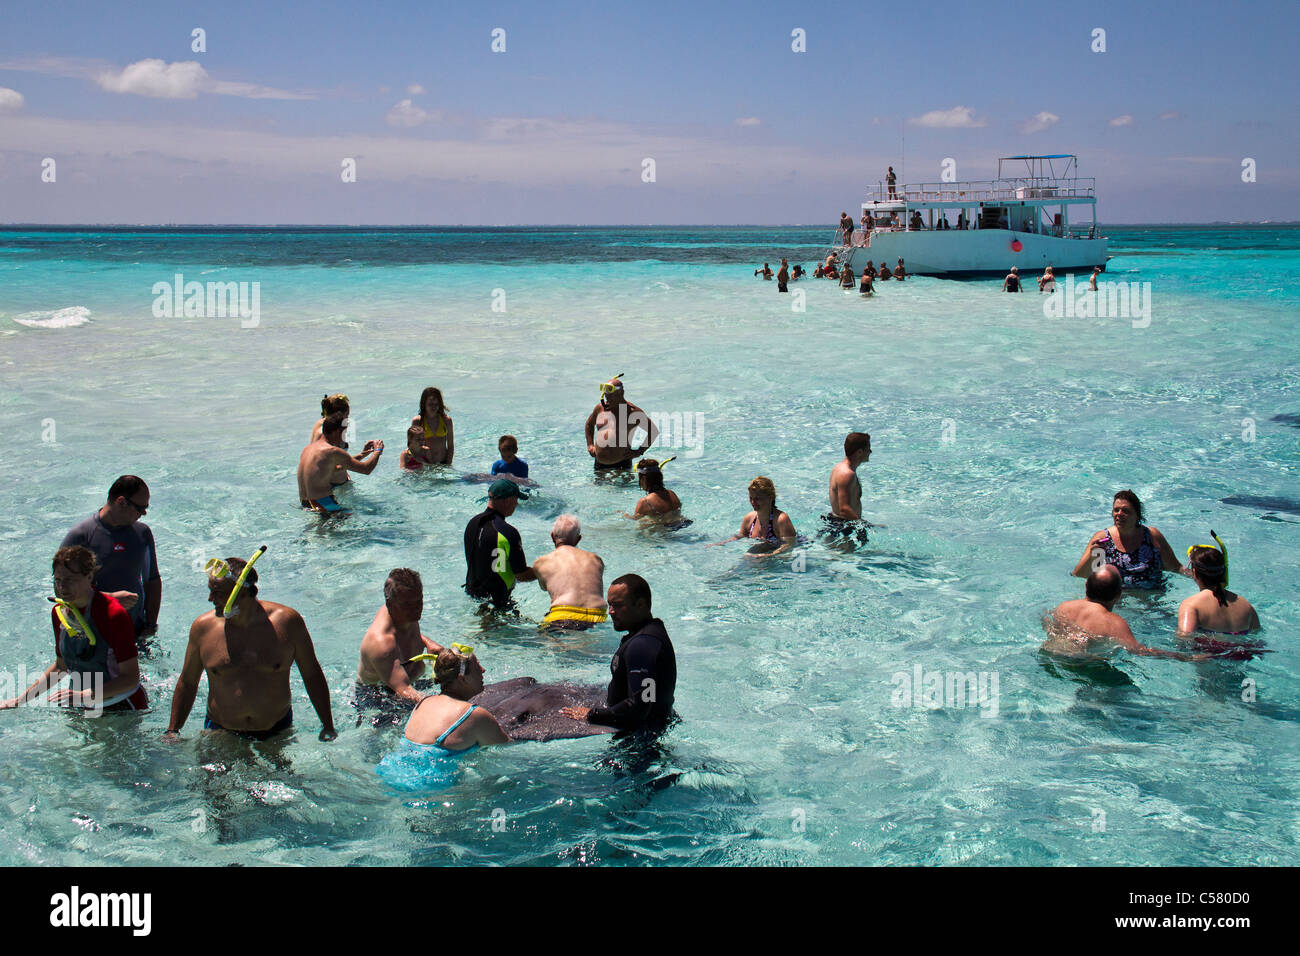 People interact with the stingrays at Stingray City, Cayman Islands Stock Photo